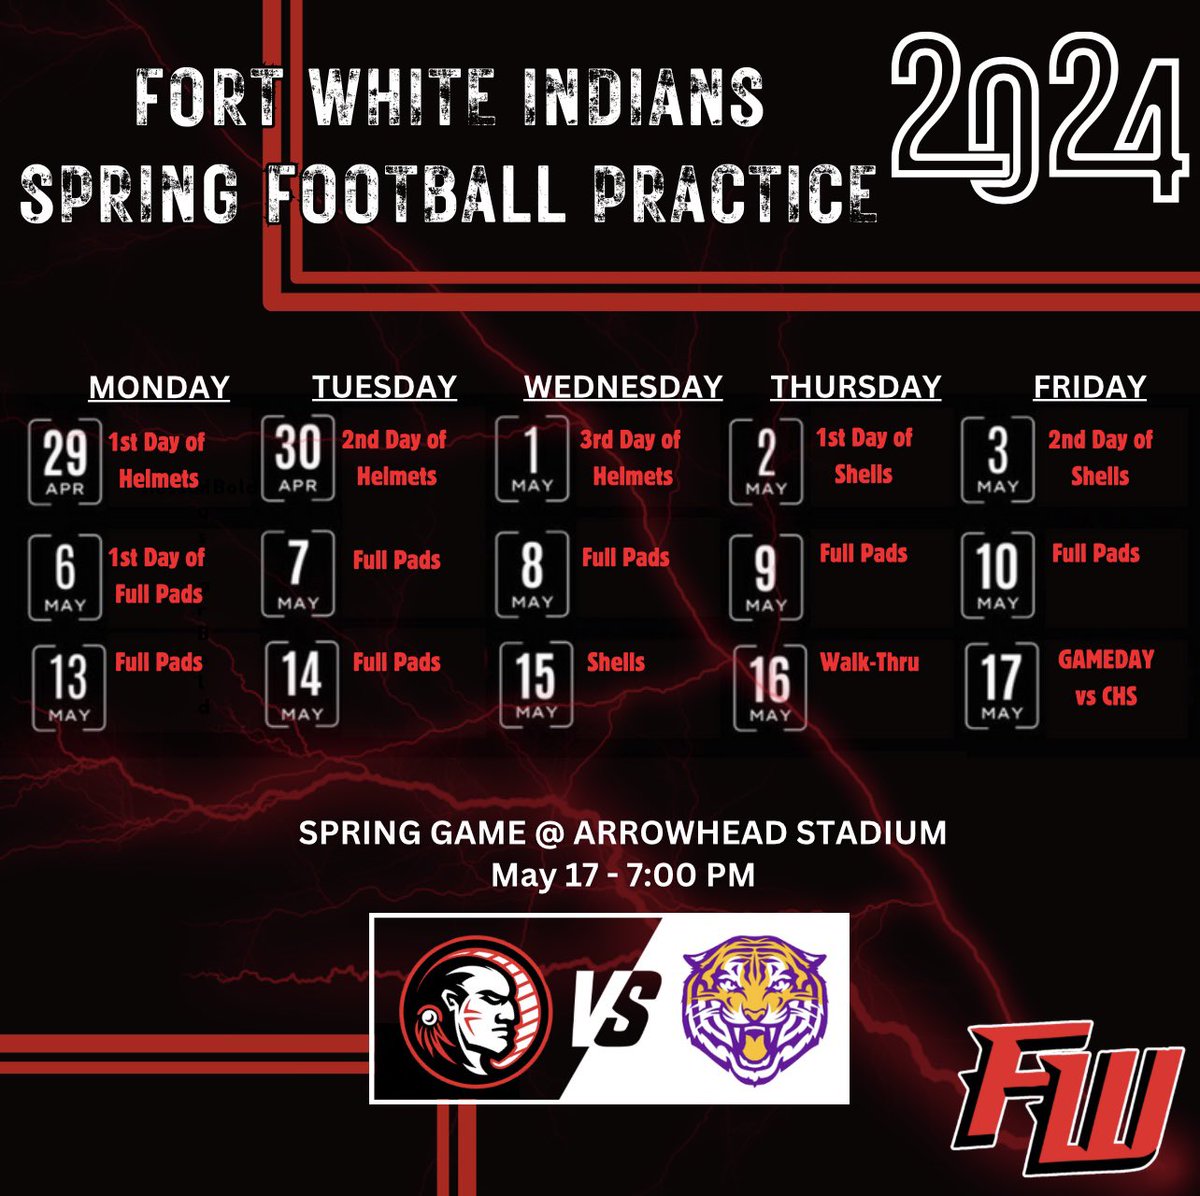 12 Days until we take the field in Fort White! 🔴⚫️ Looking forward to seeing what this group can do! #RollTribe